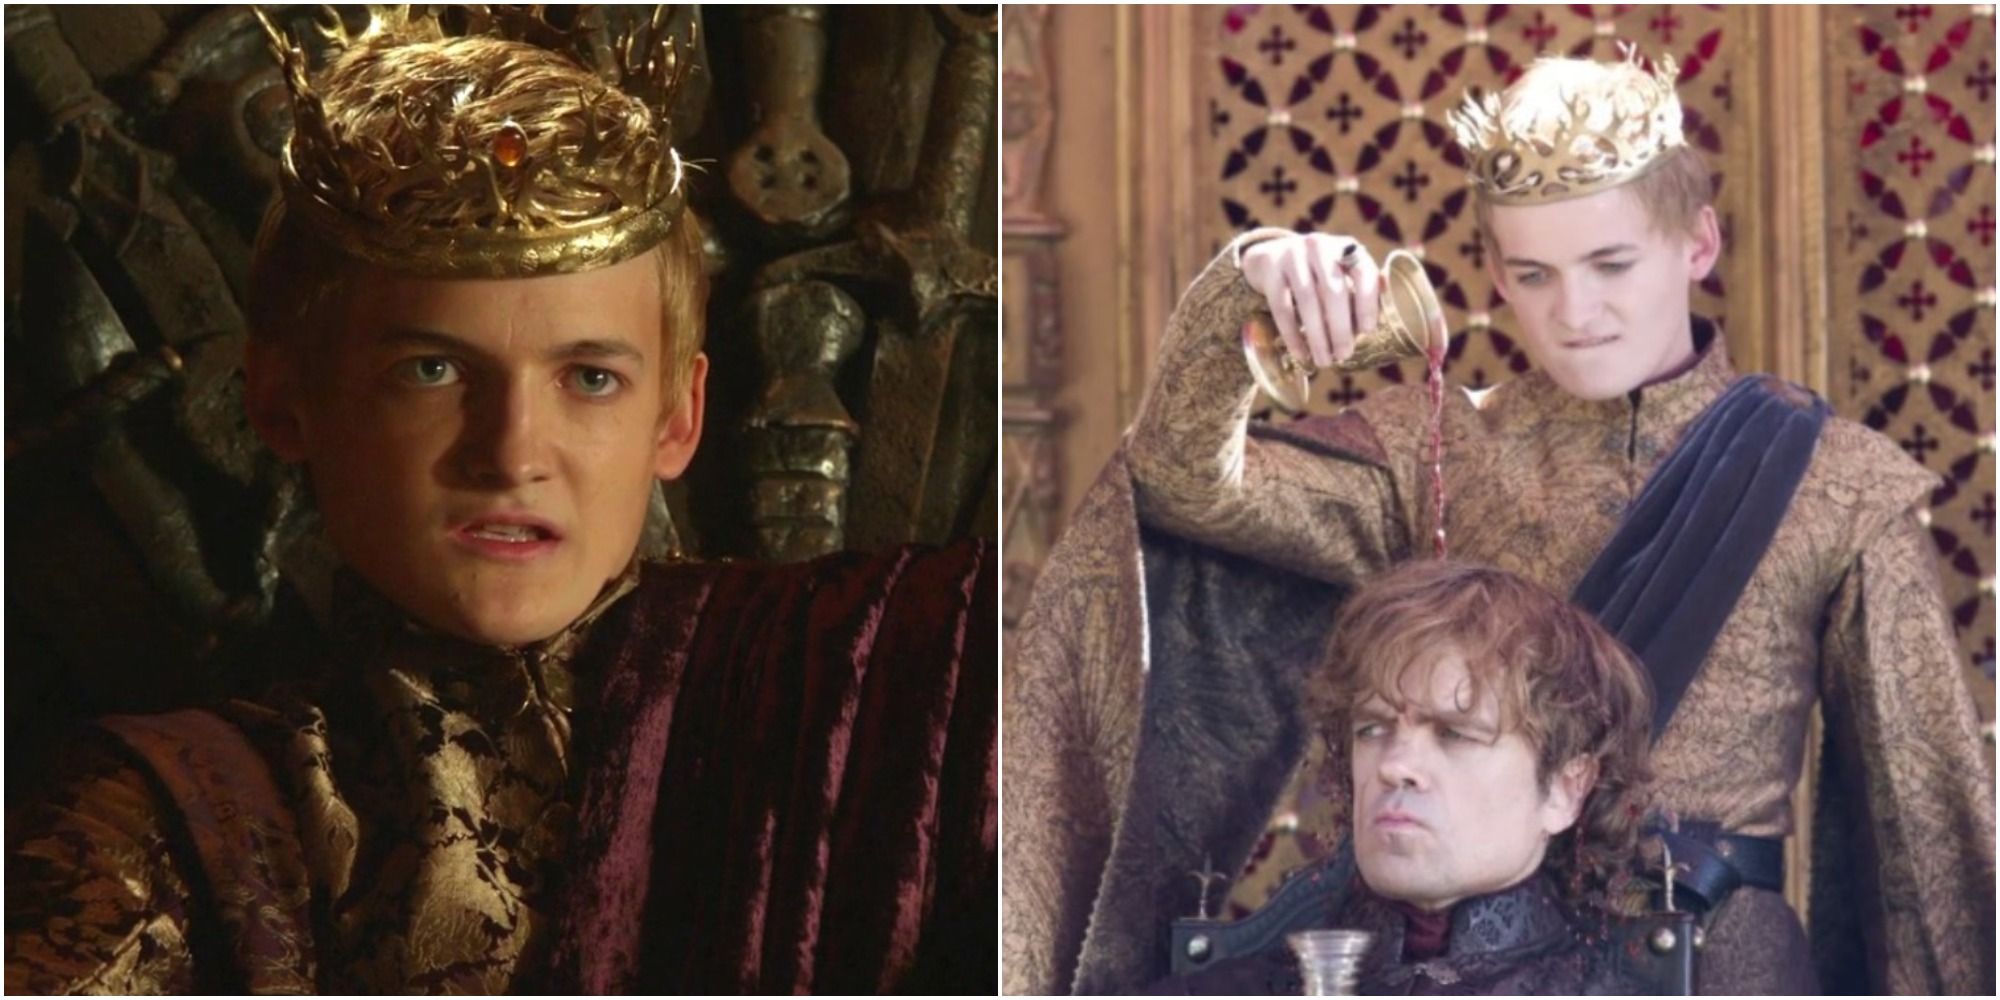 Game of Thrones — Joffrey and Tyrion